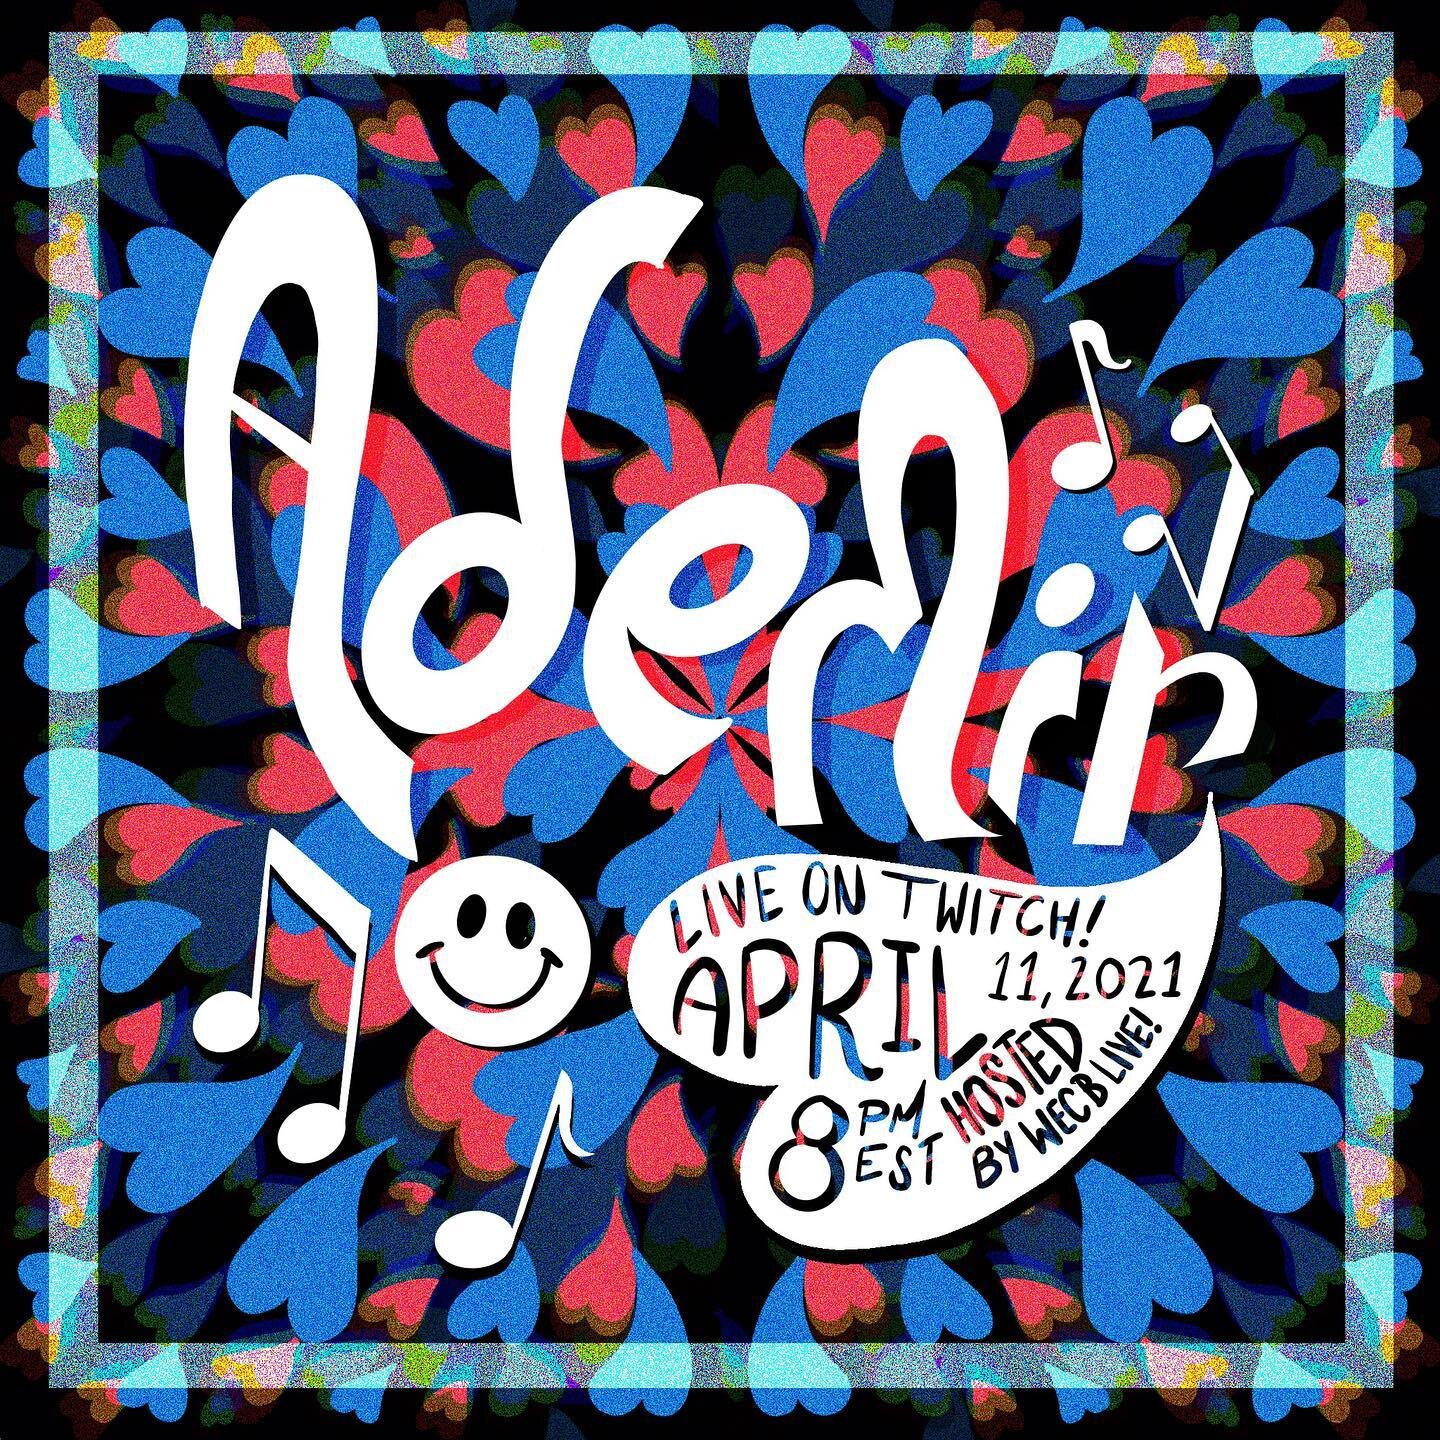 Catch @ademirmakesmusic LIVE on WECB&rsquo;s Twitch 4/11 at 8PM EST!

ALT TEXT:

Dozens for blue and red hearts make up the background, which is encased by a clear, square border; two music notes and a smiley face (all three drawn in white) in bottom left; [TEXT READS: ADEMIR; LIVE ON TWITCH! APRIL 11, 2021 8PM EST; HOSTED BY WECB LIVE!]